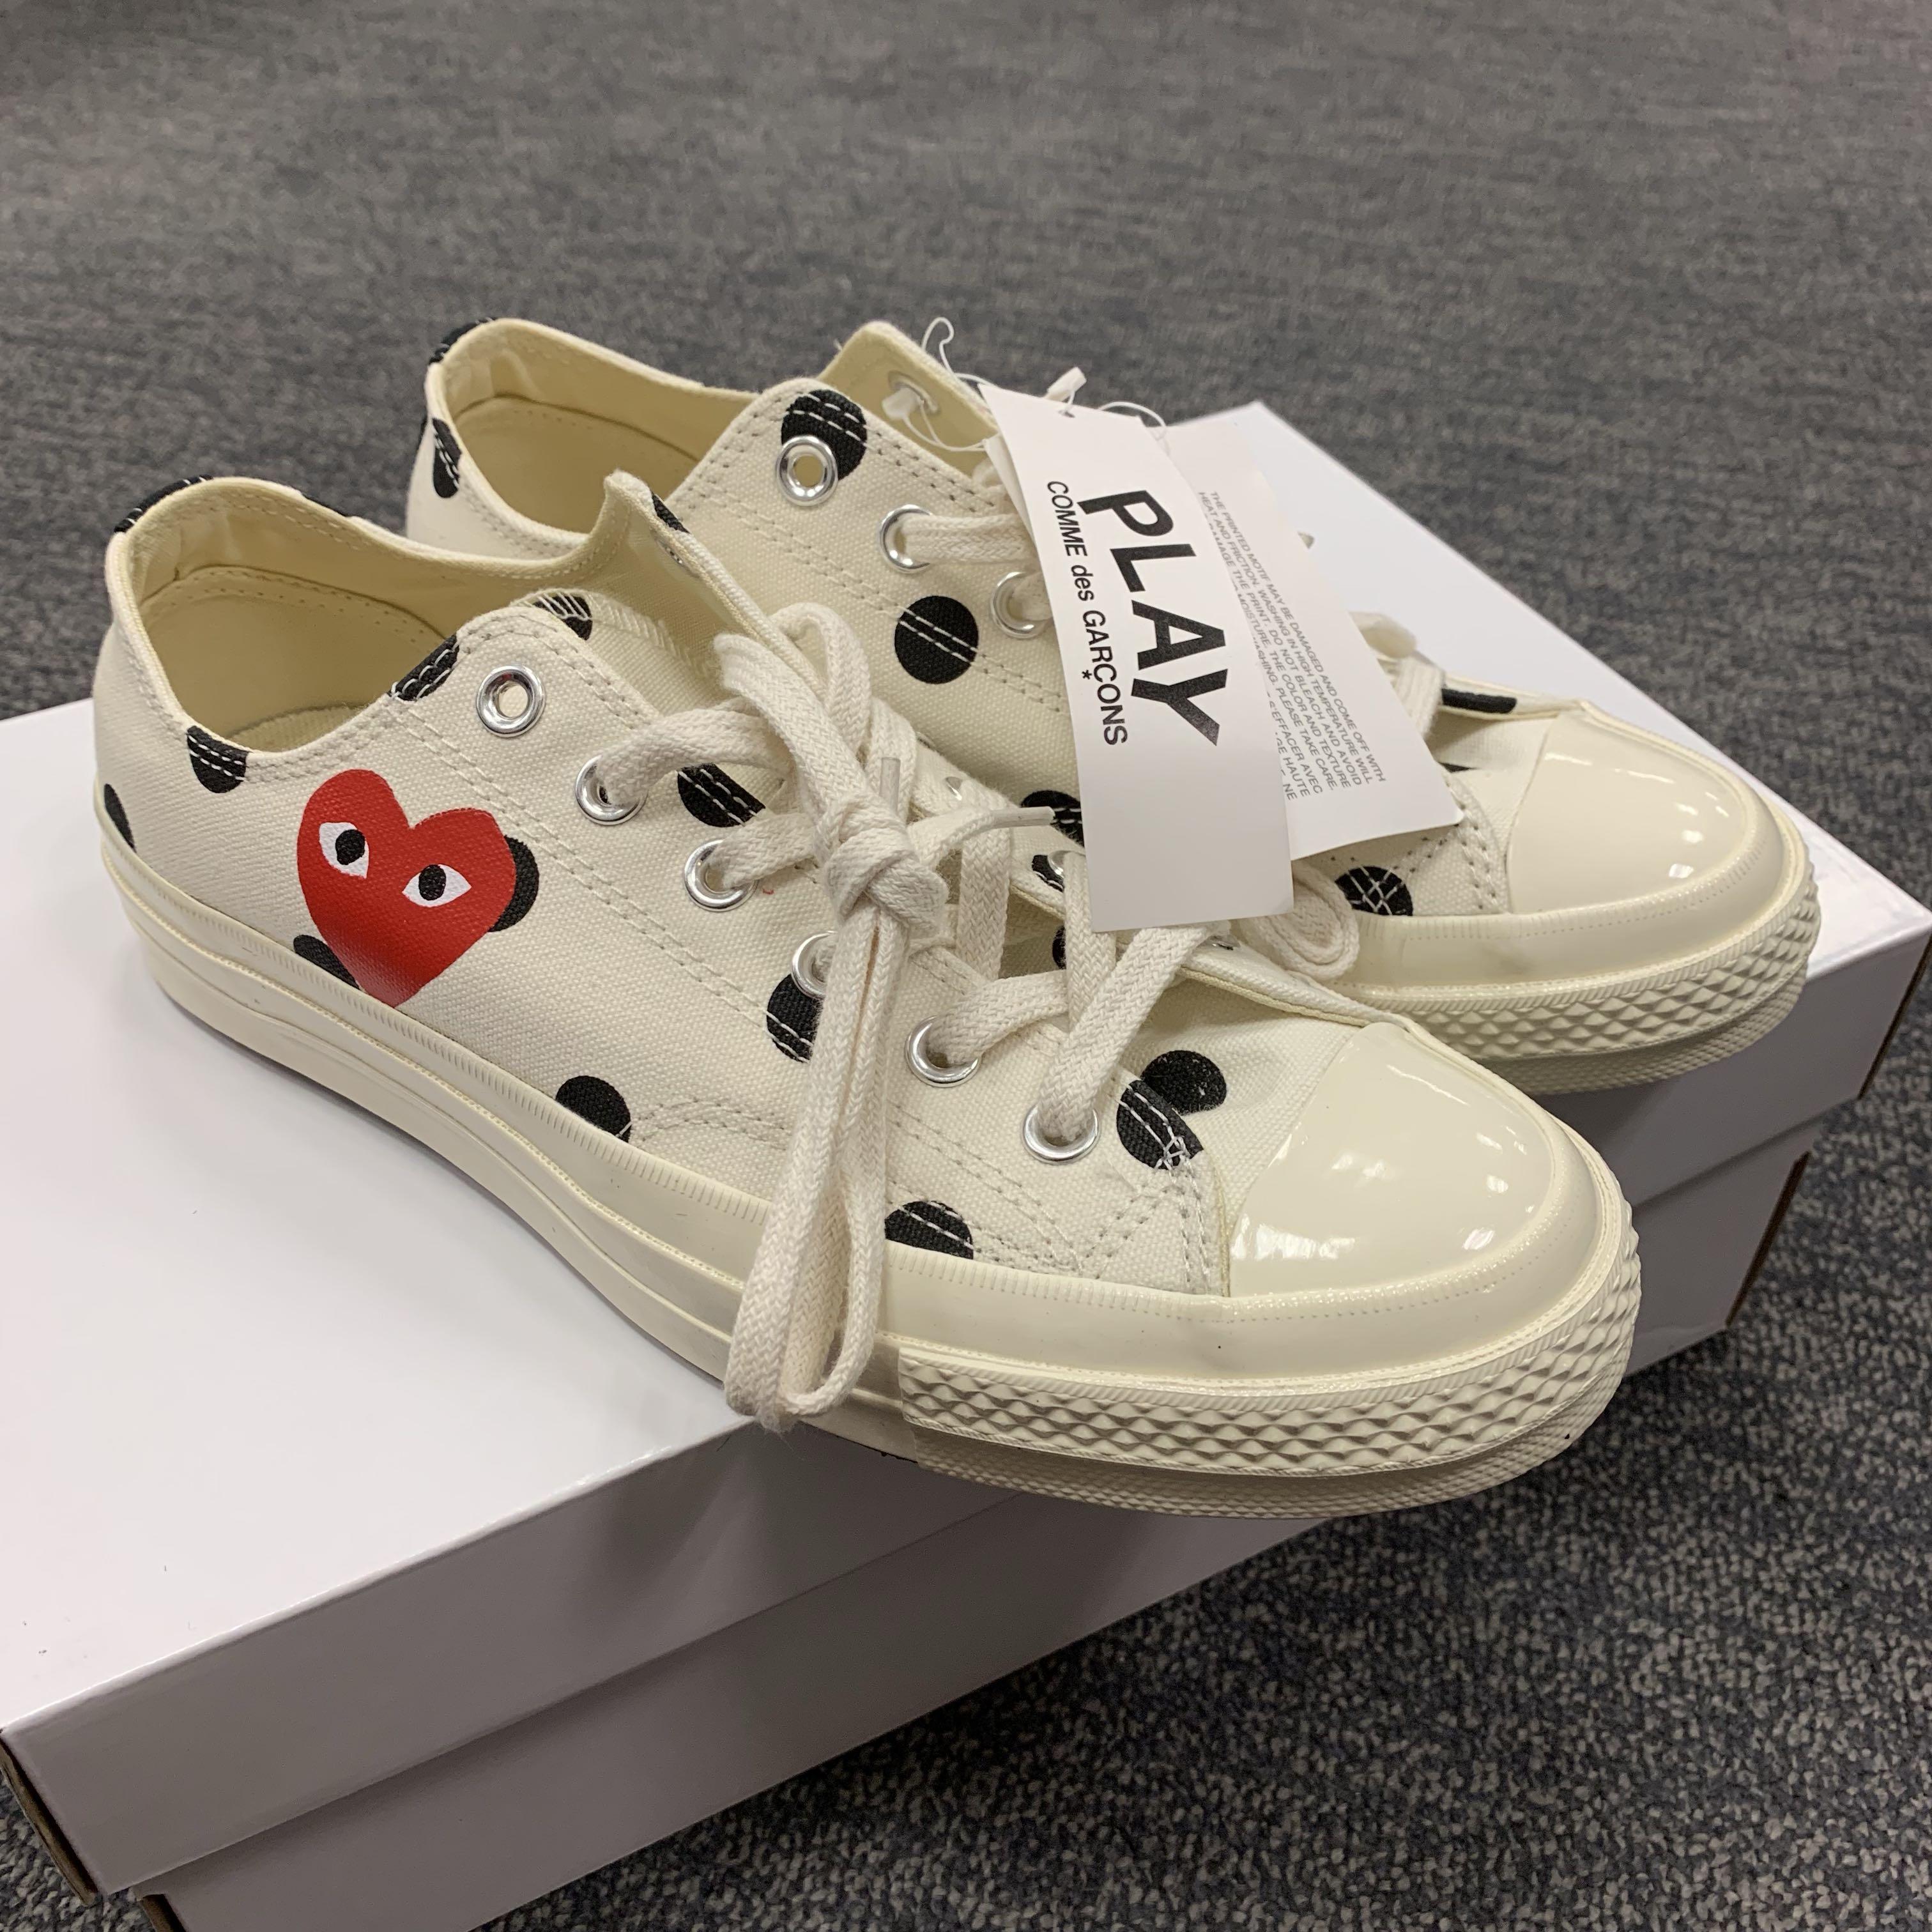 hardware Relaterede Det BN] CDG PLAY x Converse Polka Dot Chuck Taylor, Women's Fashion, Footwear,  Sneakers on Carousell